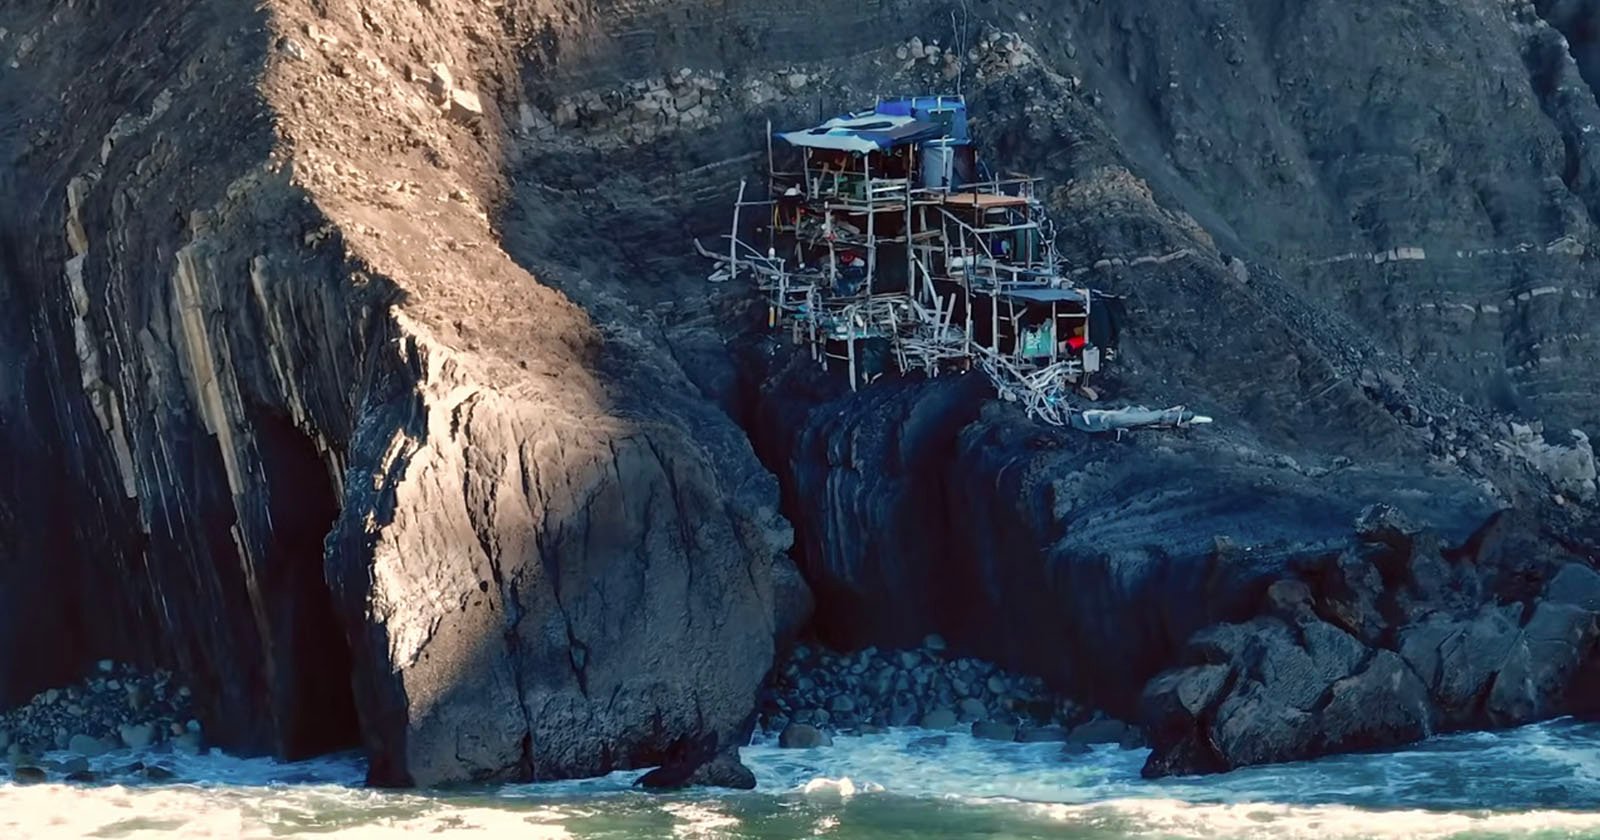  drone photographer discovers mystery driftwood shack perched cliff 